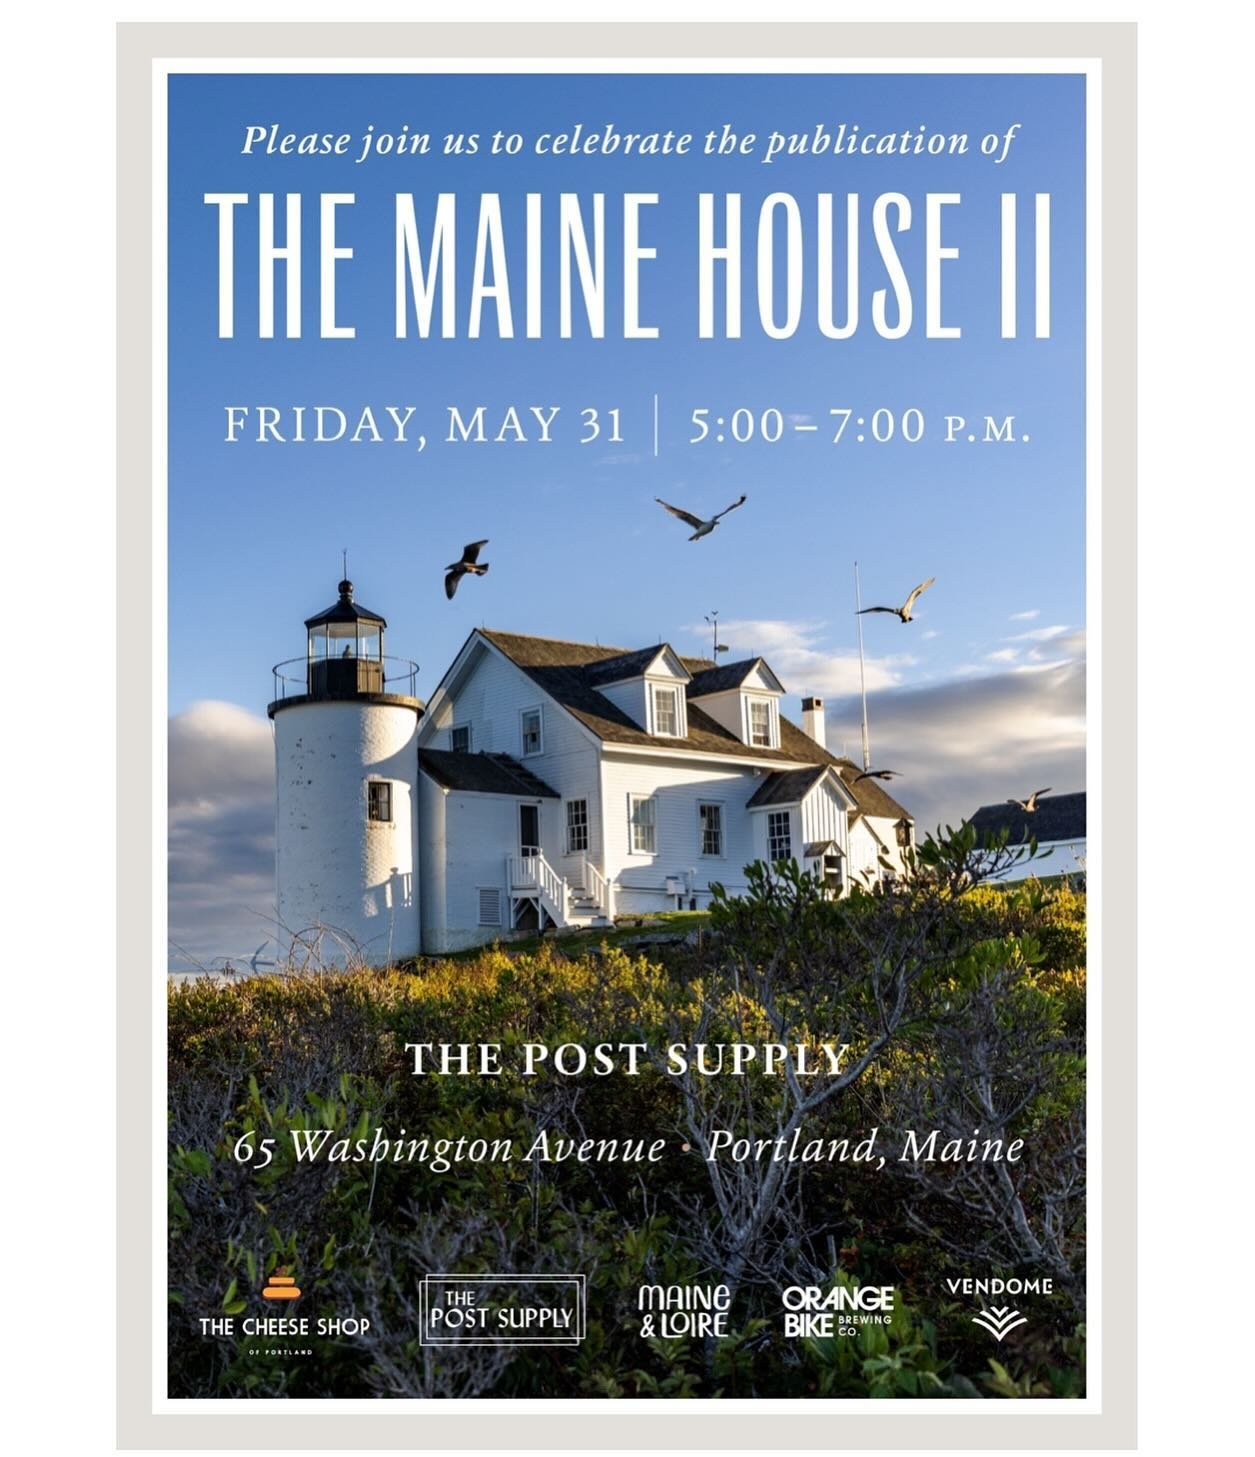 🌲🌊🐚We are THRILLED to be hosting the launch of THE MAINE HOUSE BOOK II at THE POST SUPPLY!! 

Please join the team behind this incredible tome Friday 5/31 from 5-7pm in our shop located at 65 Washington Ave., Portland,ME. 

🍷🍺🧀We&rsquo;ll have 